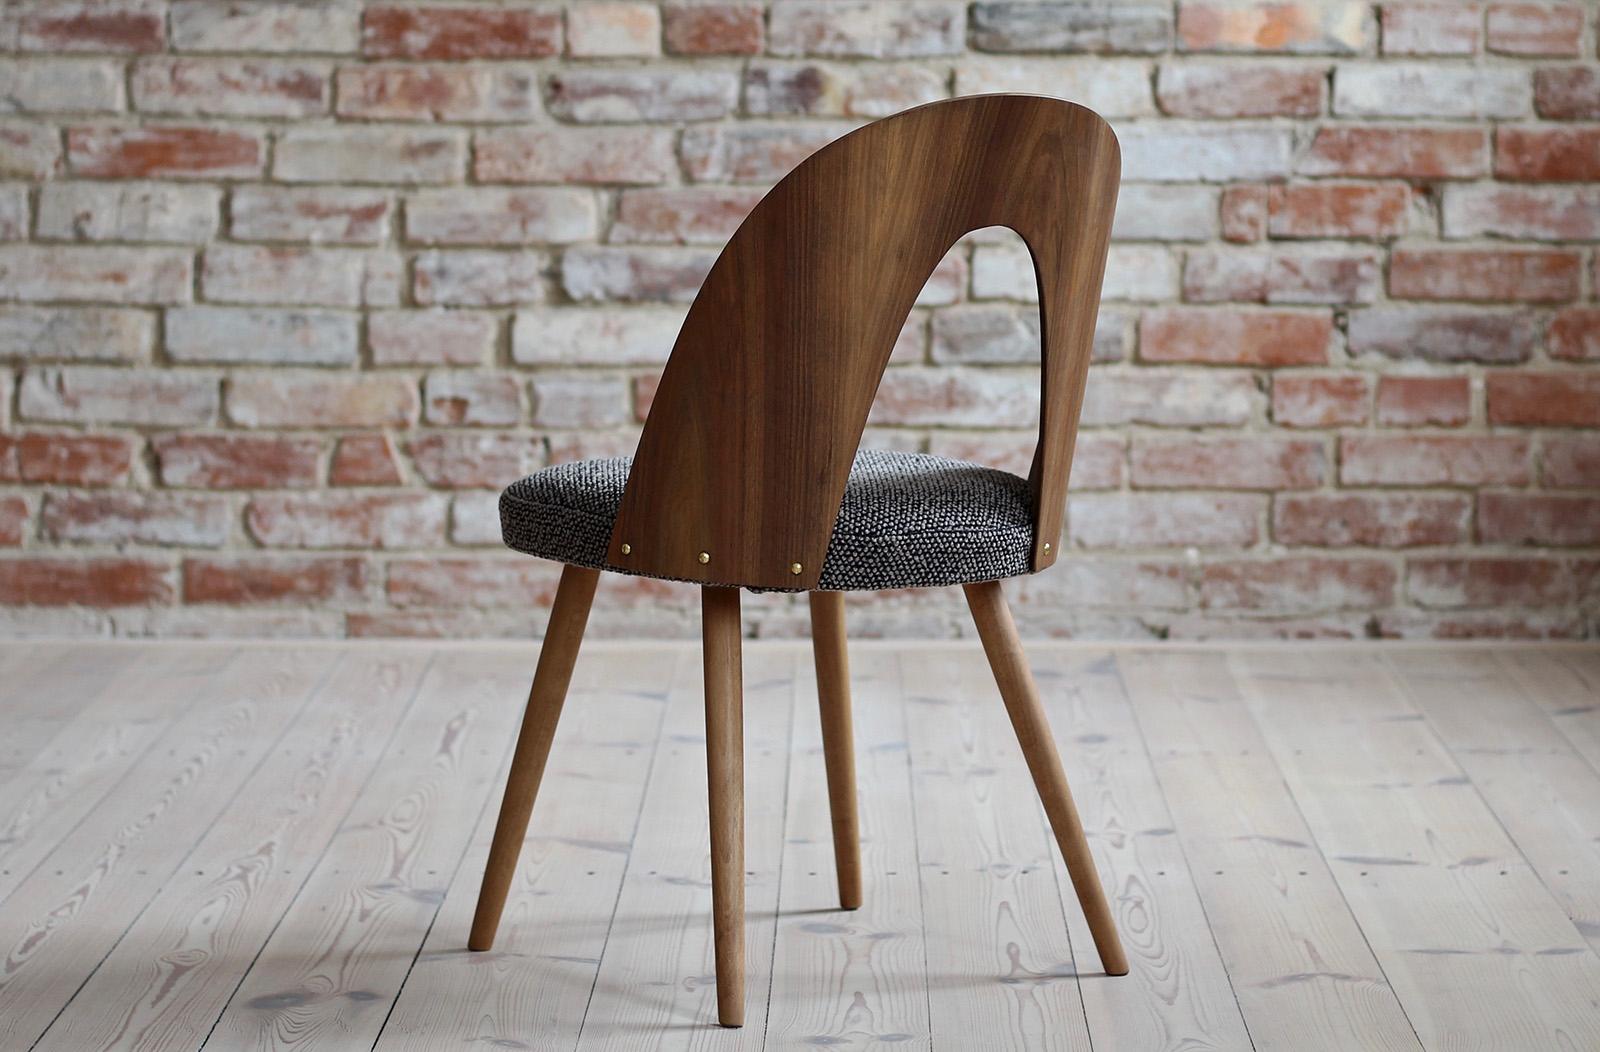 Set of 4 Midcentury Dining Chairs by A. Šuman, Reupholstered in Kvadrat Fabric 2